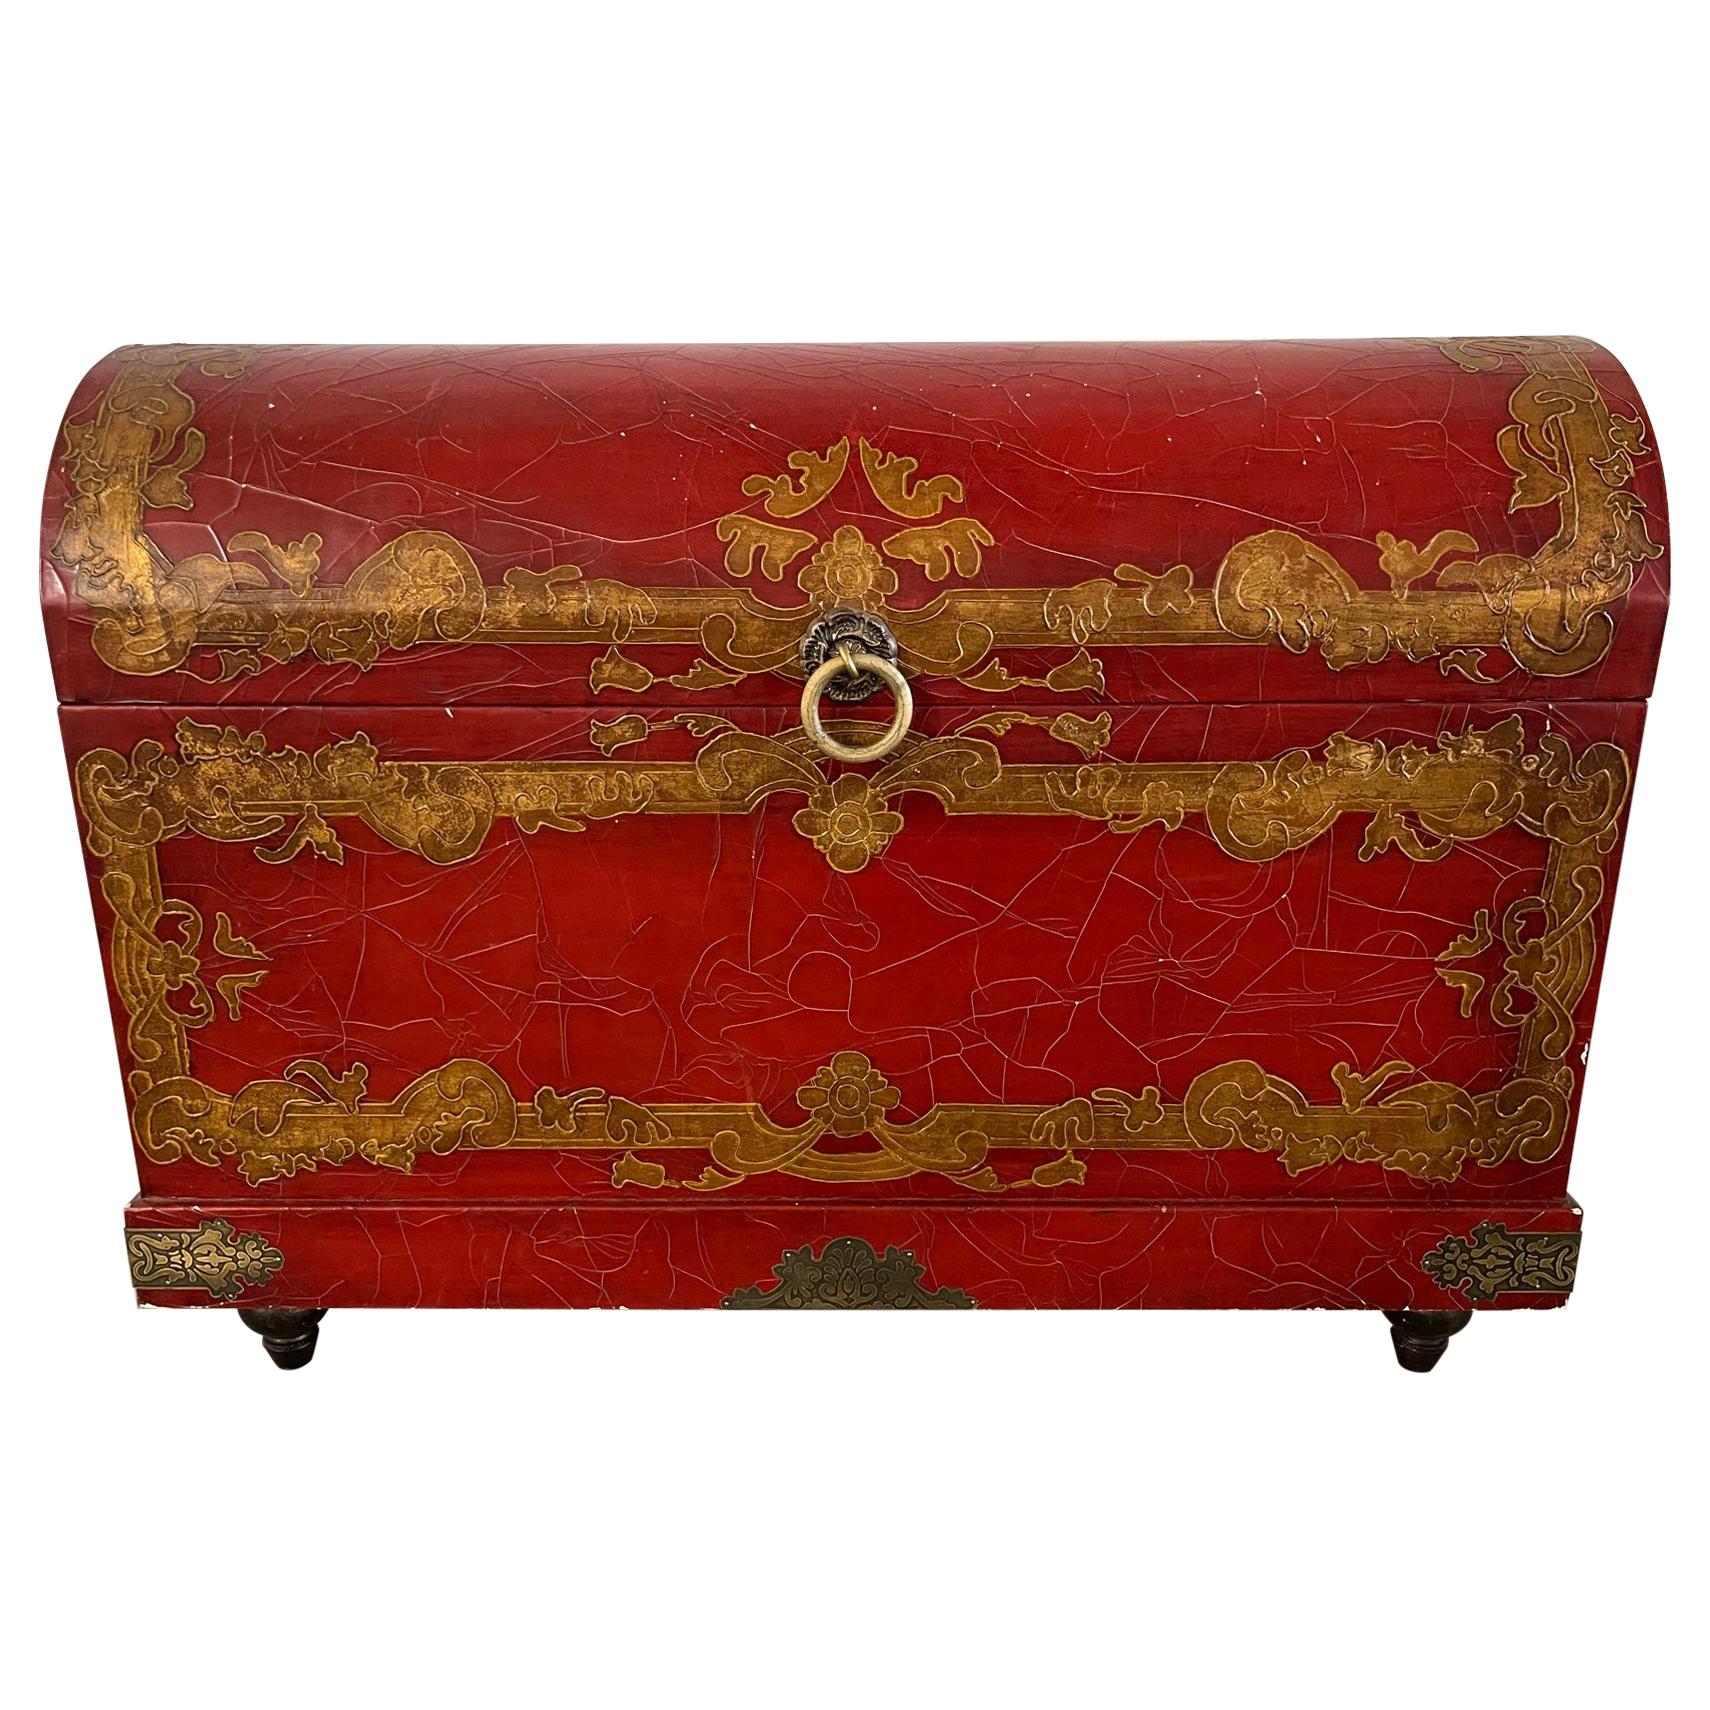 Chinese Red Lacquer and Gold Detailing Dome Top Trunk on Feet, 20th Century